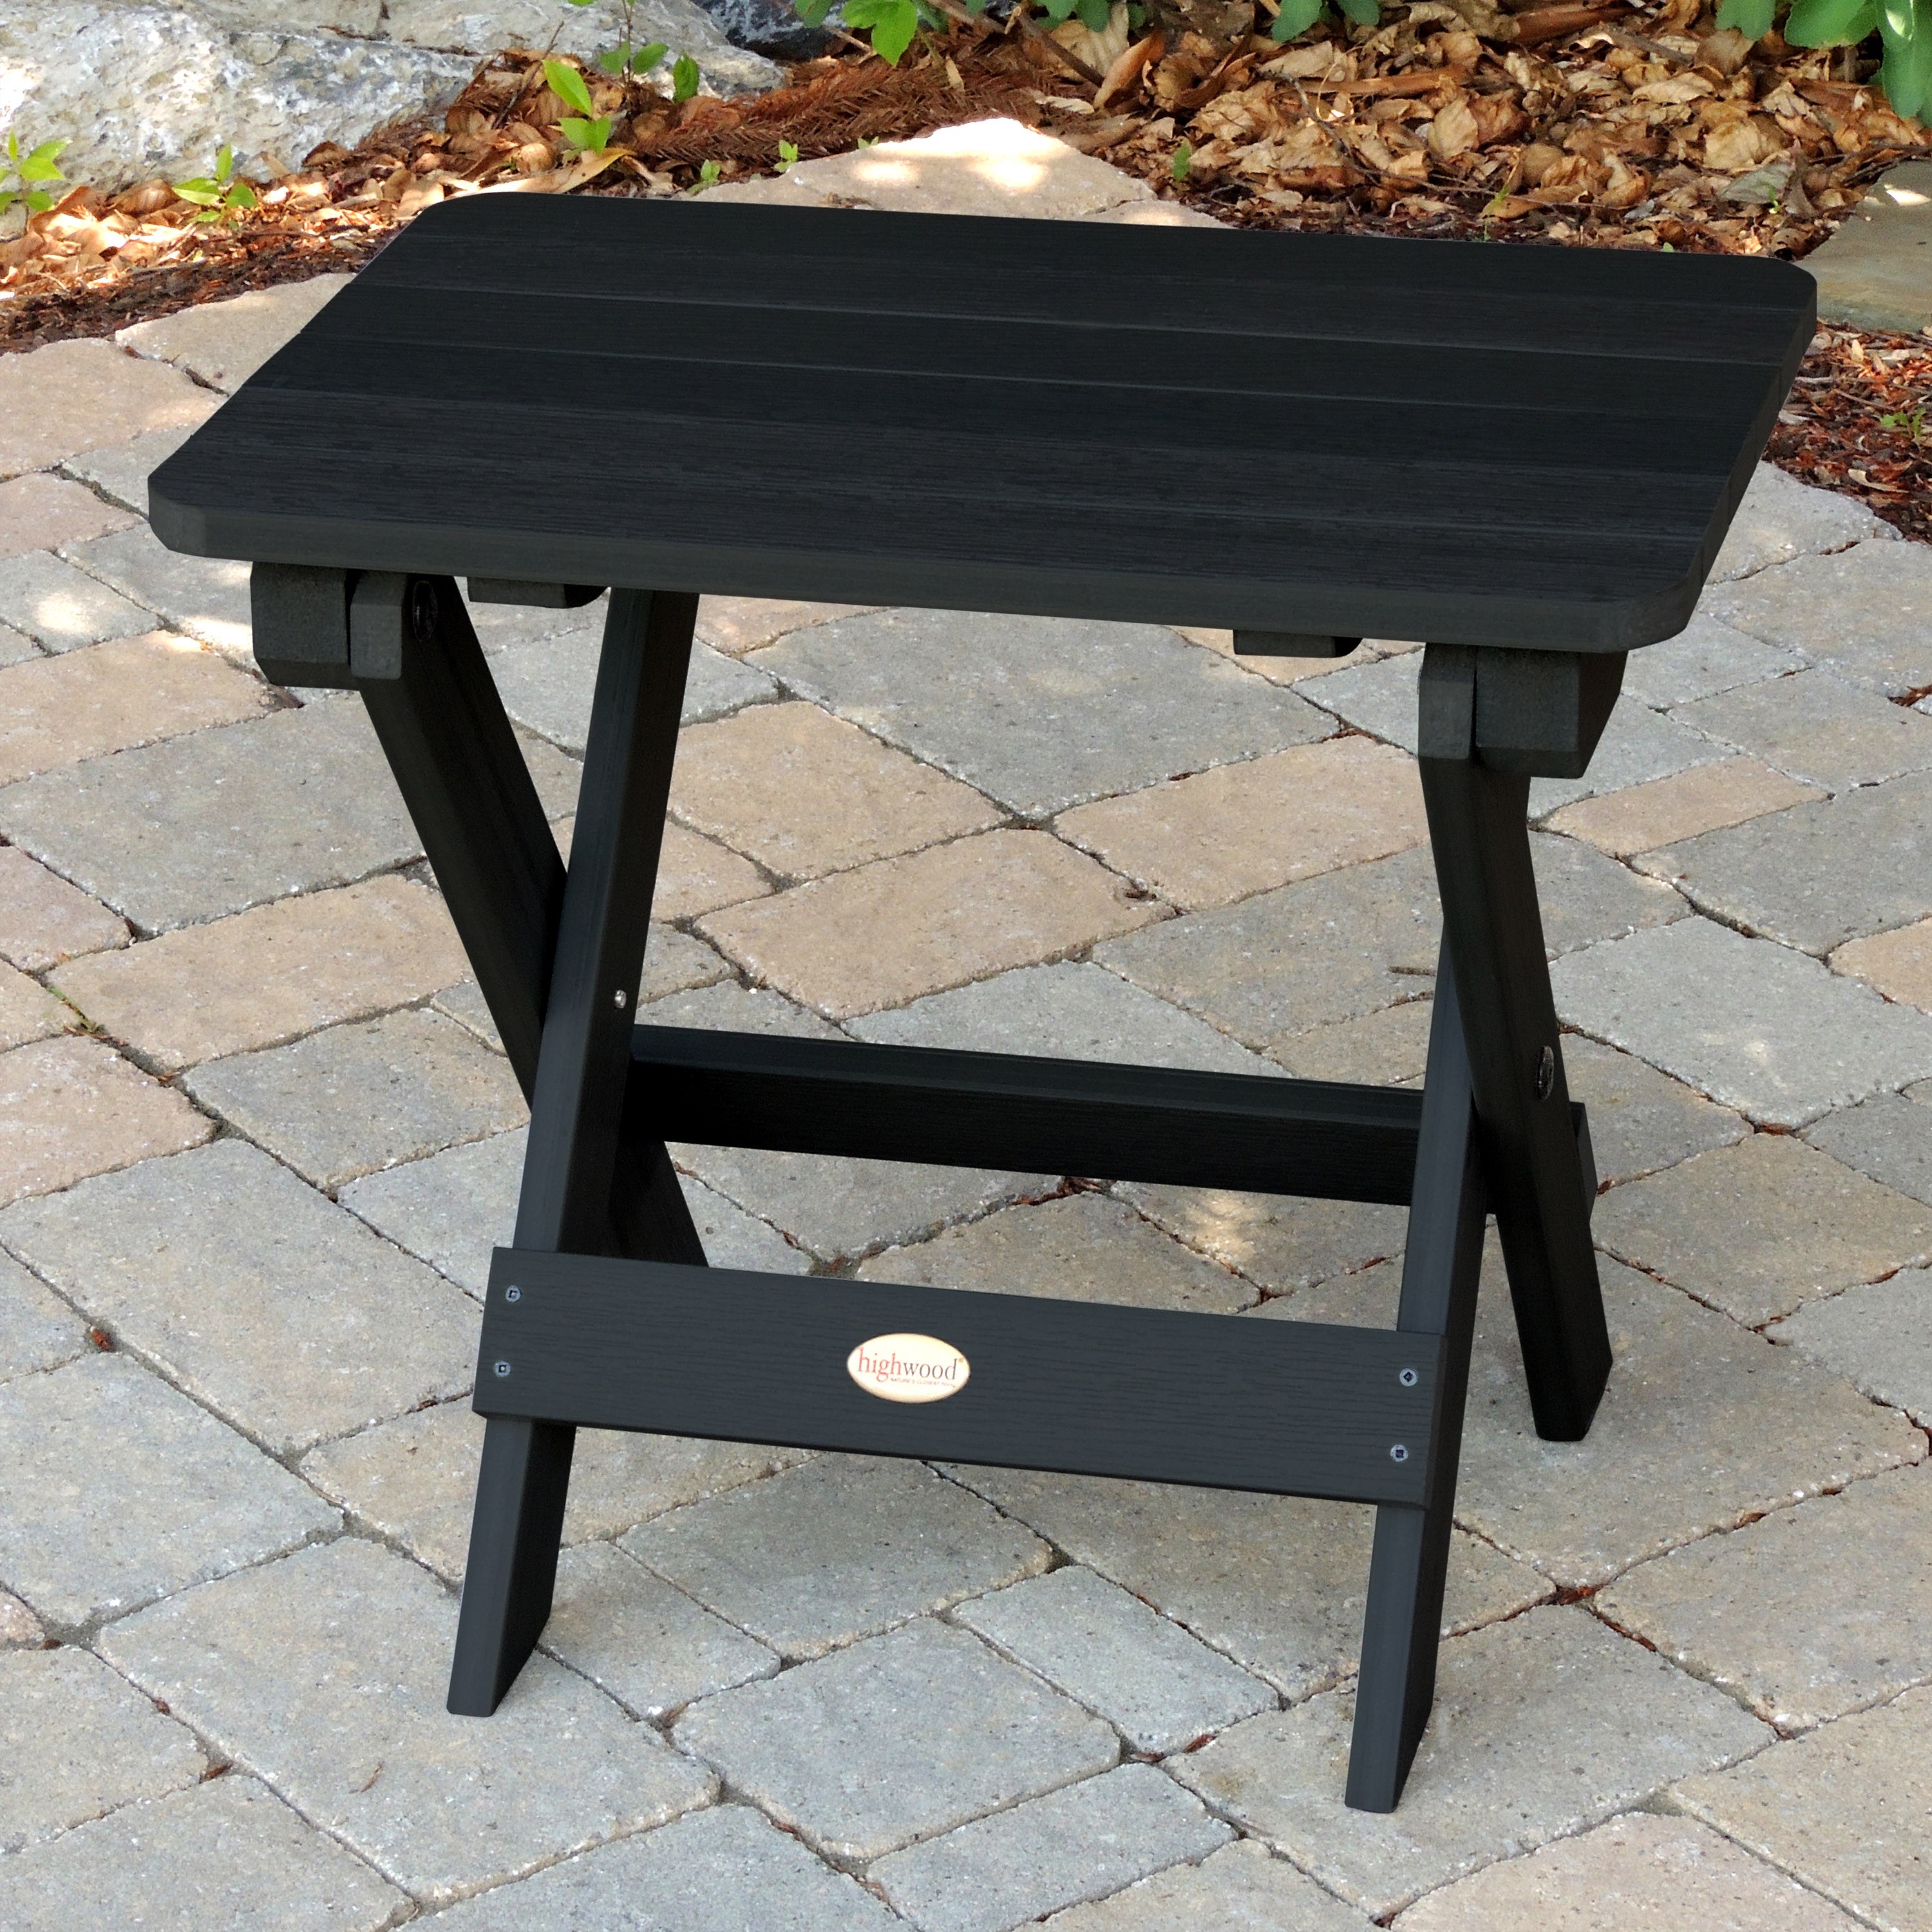 folding adirondack side table highwood bke patio accent outdoor furniture end dimensions stand alone umbrella small wooden with drawers modern cocktail square pedestal piece set